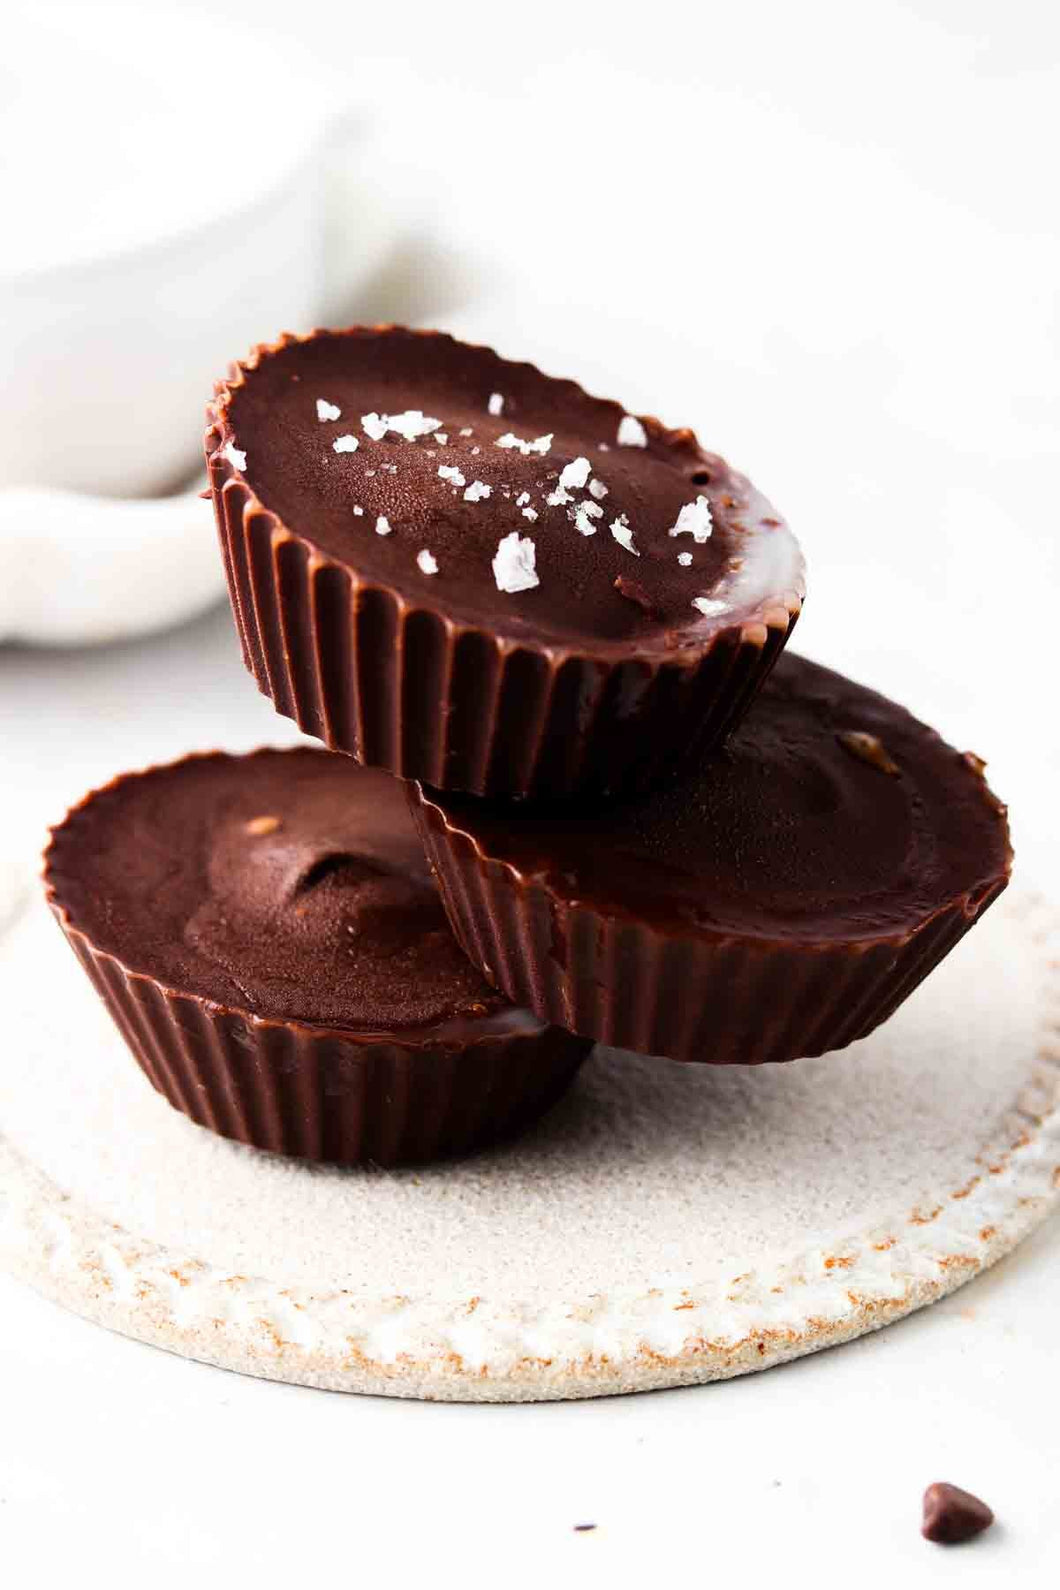 NEW! Preorder Dairy Free Almond Butter Cups for Halloween - One Dozen